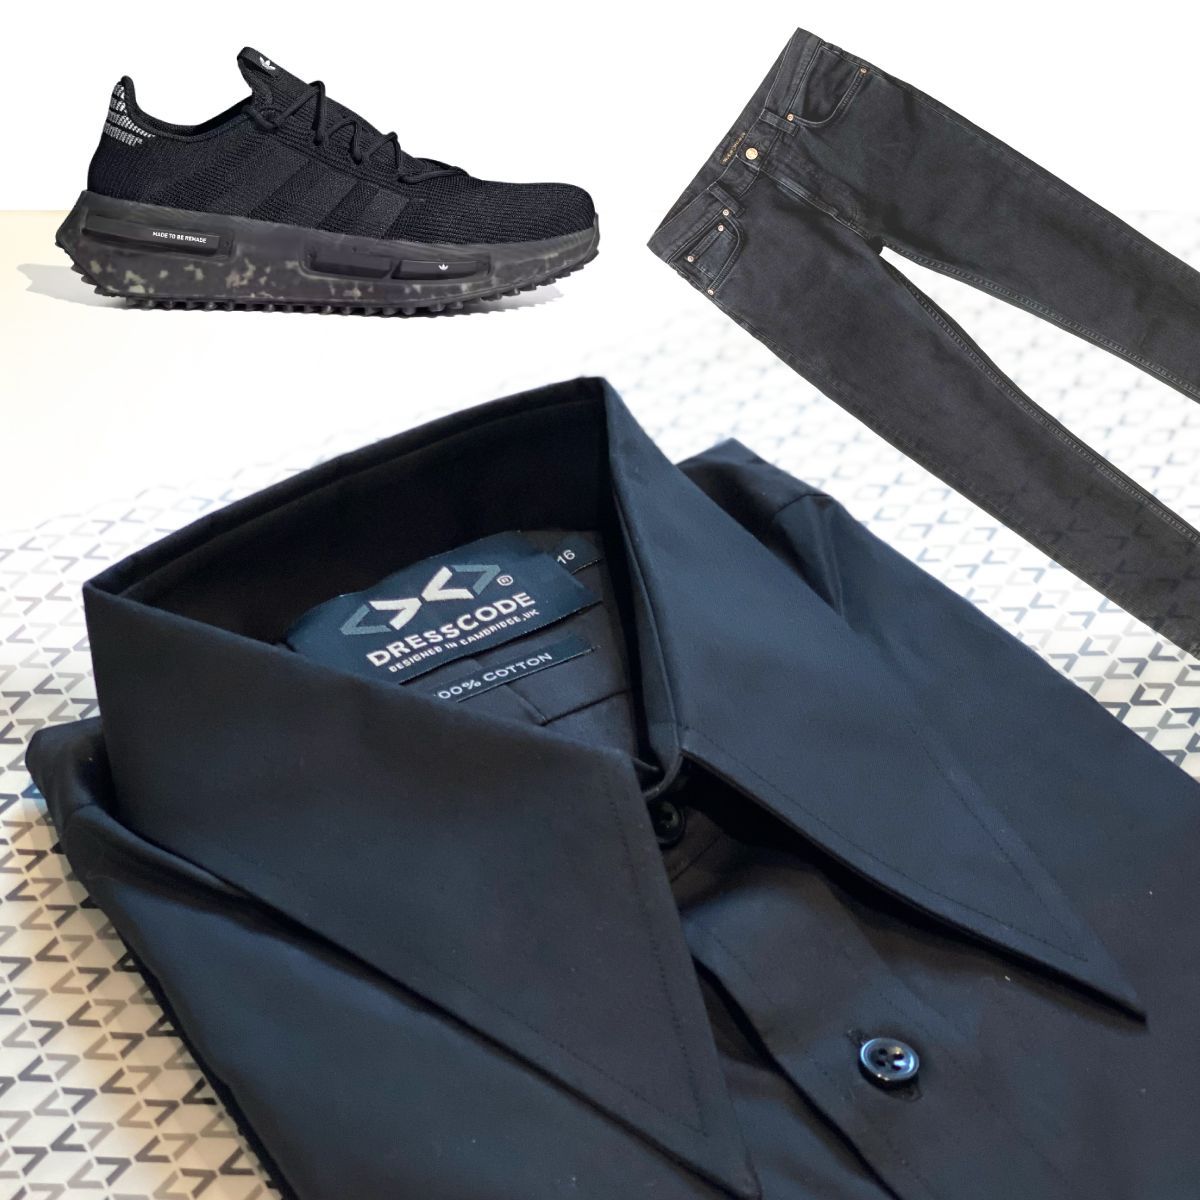 Inspired by our recent interview with musician Sam Jones, the black mono wardrobe featuring 🖤 DressCode Spear collar black shirt 🖤 Nudie Black jeans 🖤 Adidas Black trainers #GeekLuxe #Black #BlackShirt #DesignerBlackShirt #SpearCollarShirts #DressCode #DressCodeShirts